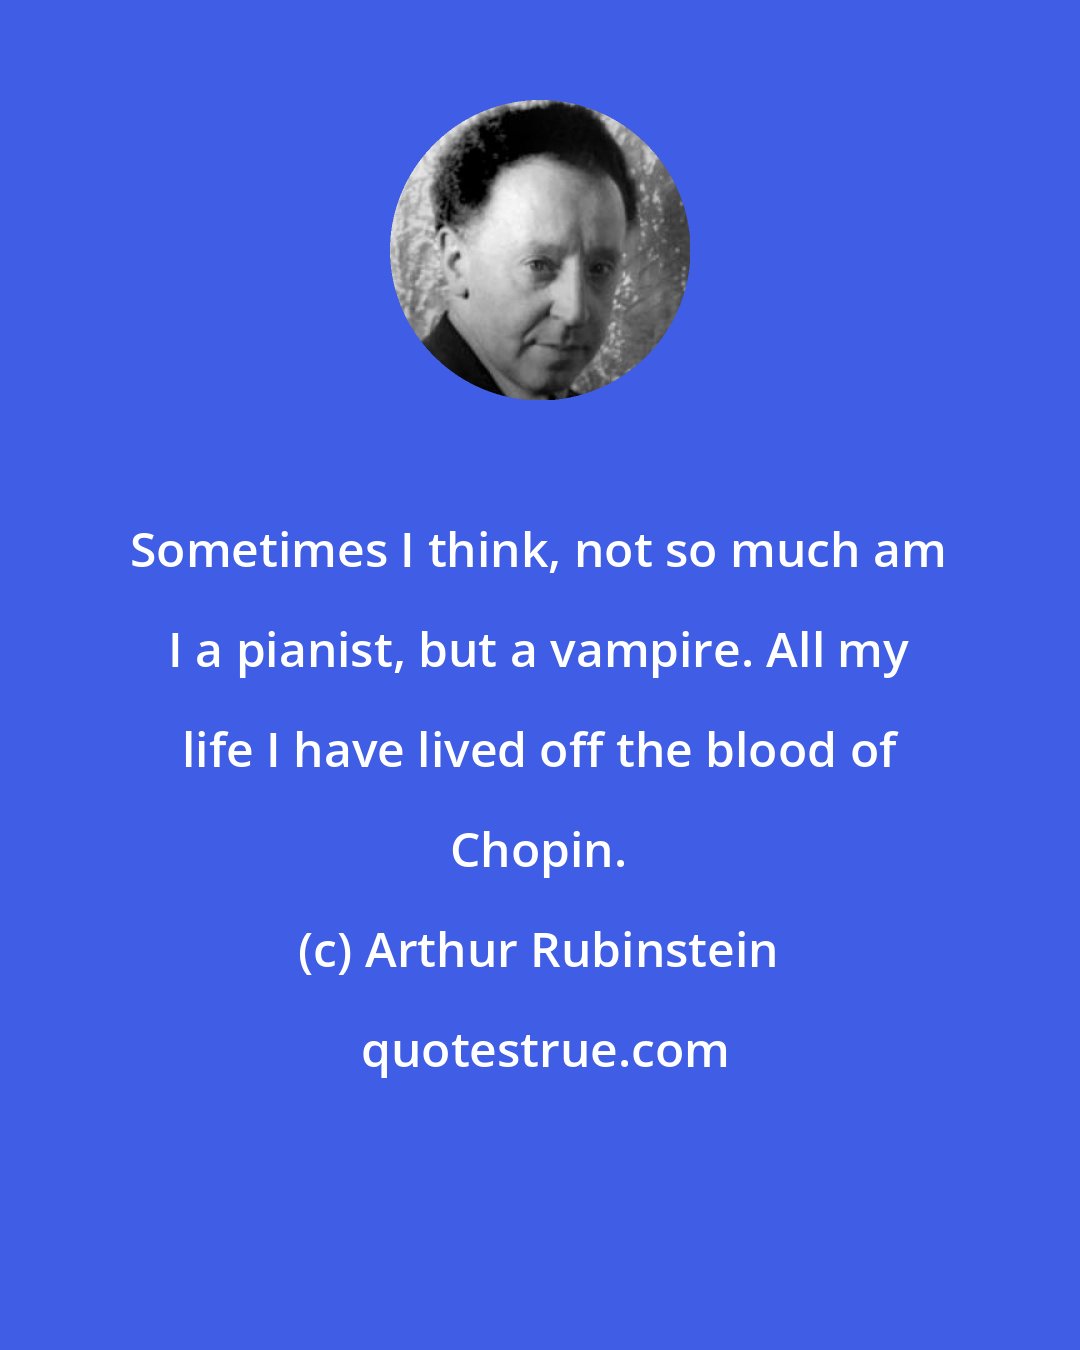 Arthur Rubinstein: Sometimes I think, not so much am I a pianist, but a vampire. All my life I have lived off the blood of Chopin.